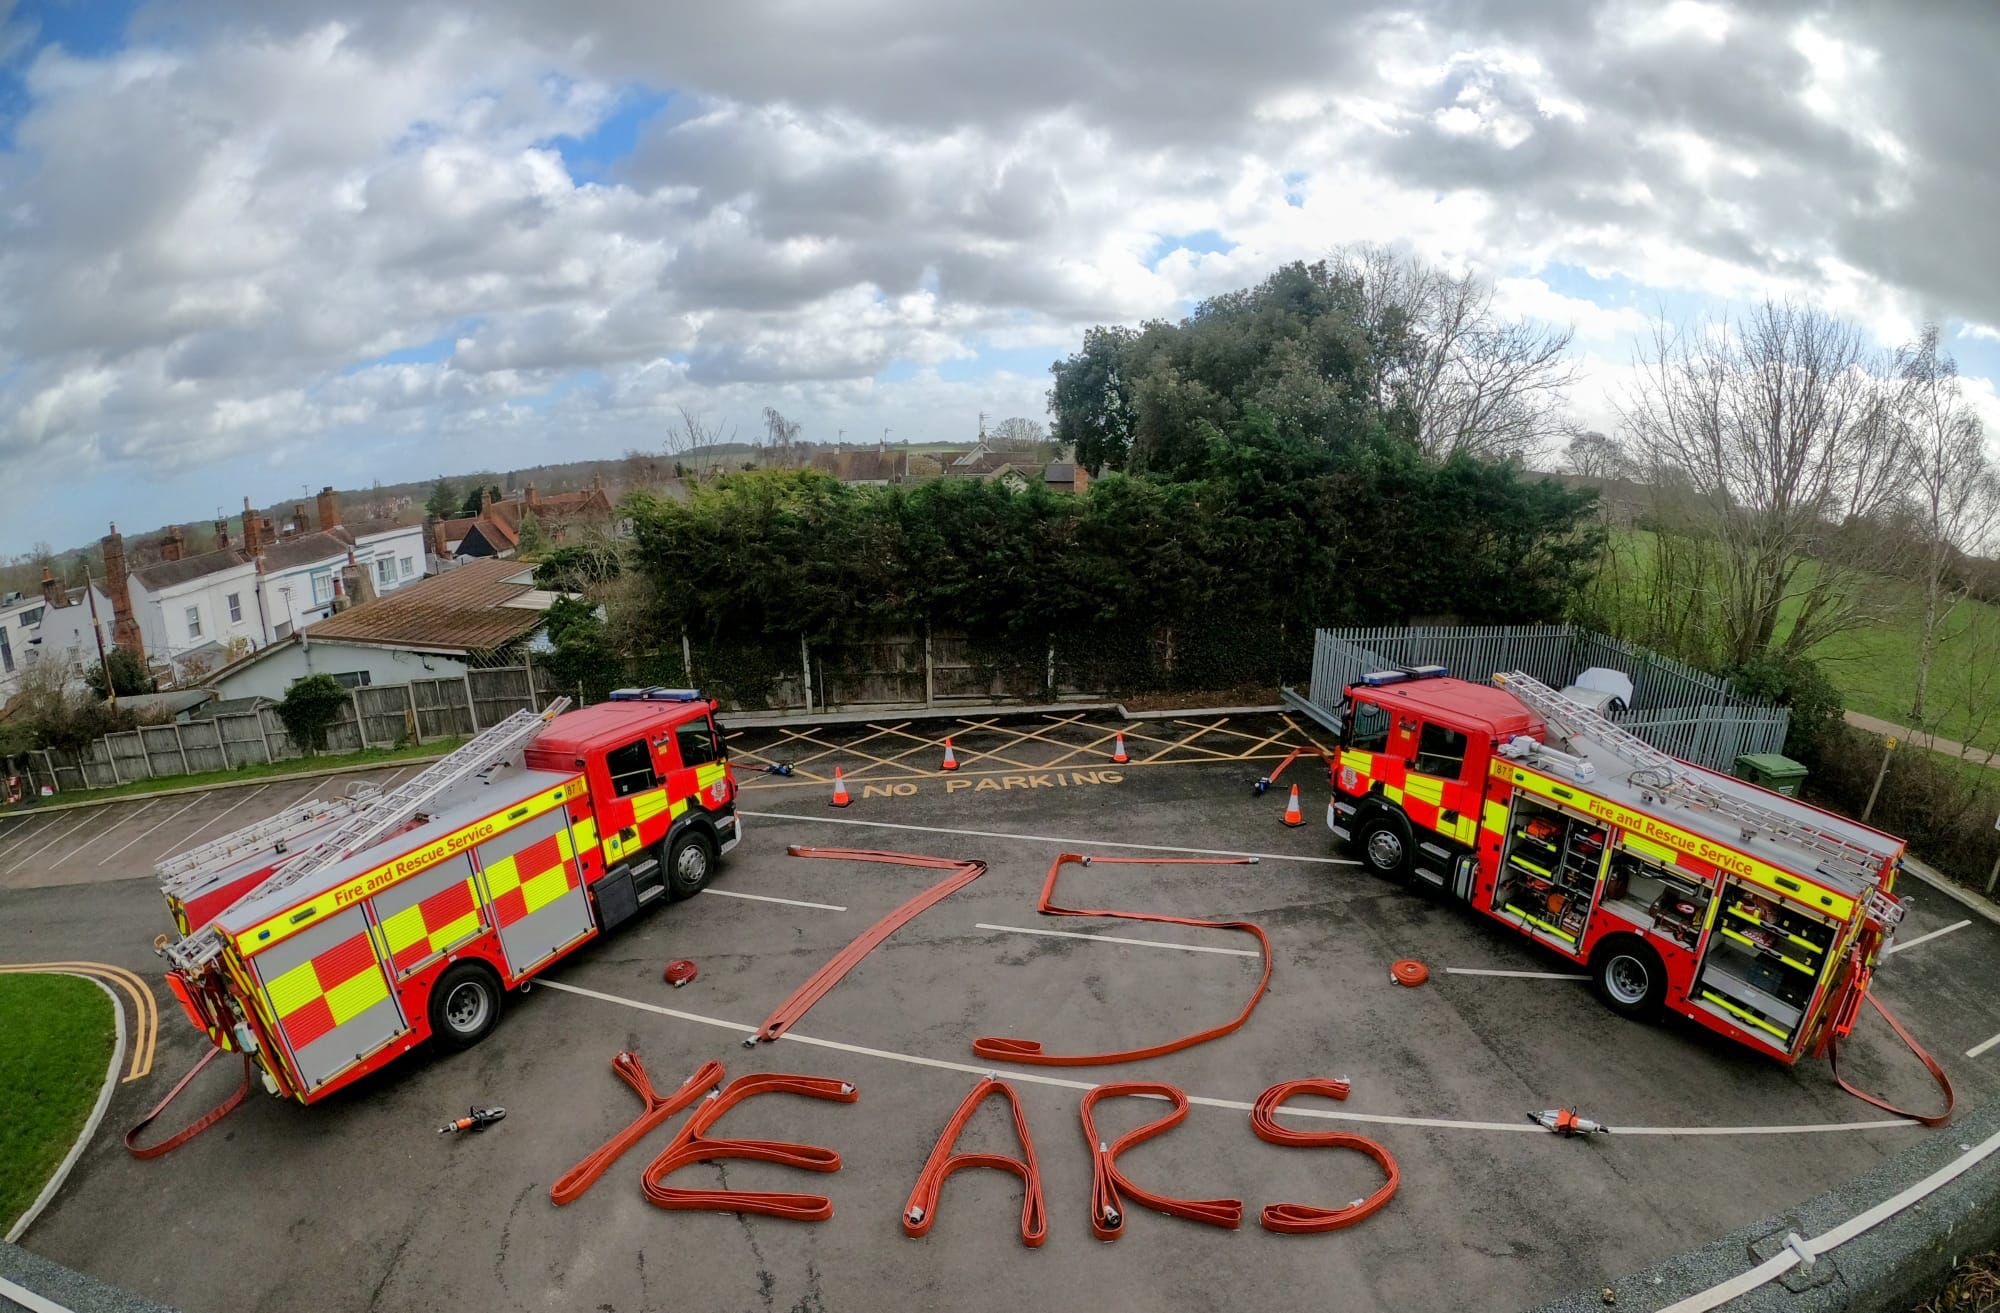 Two fire engines parked with '75 years' written using fire hoses. 